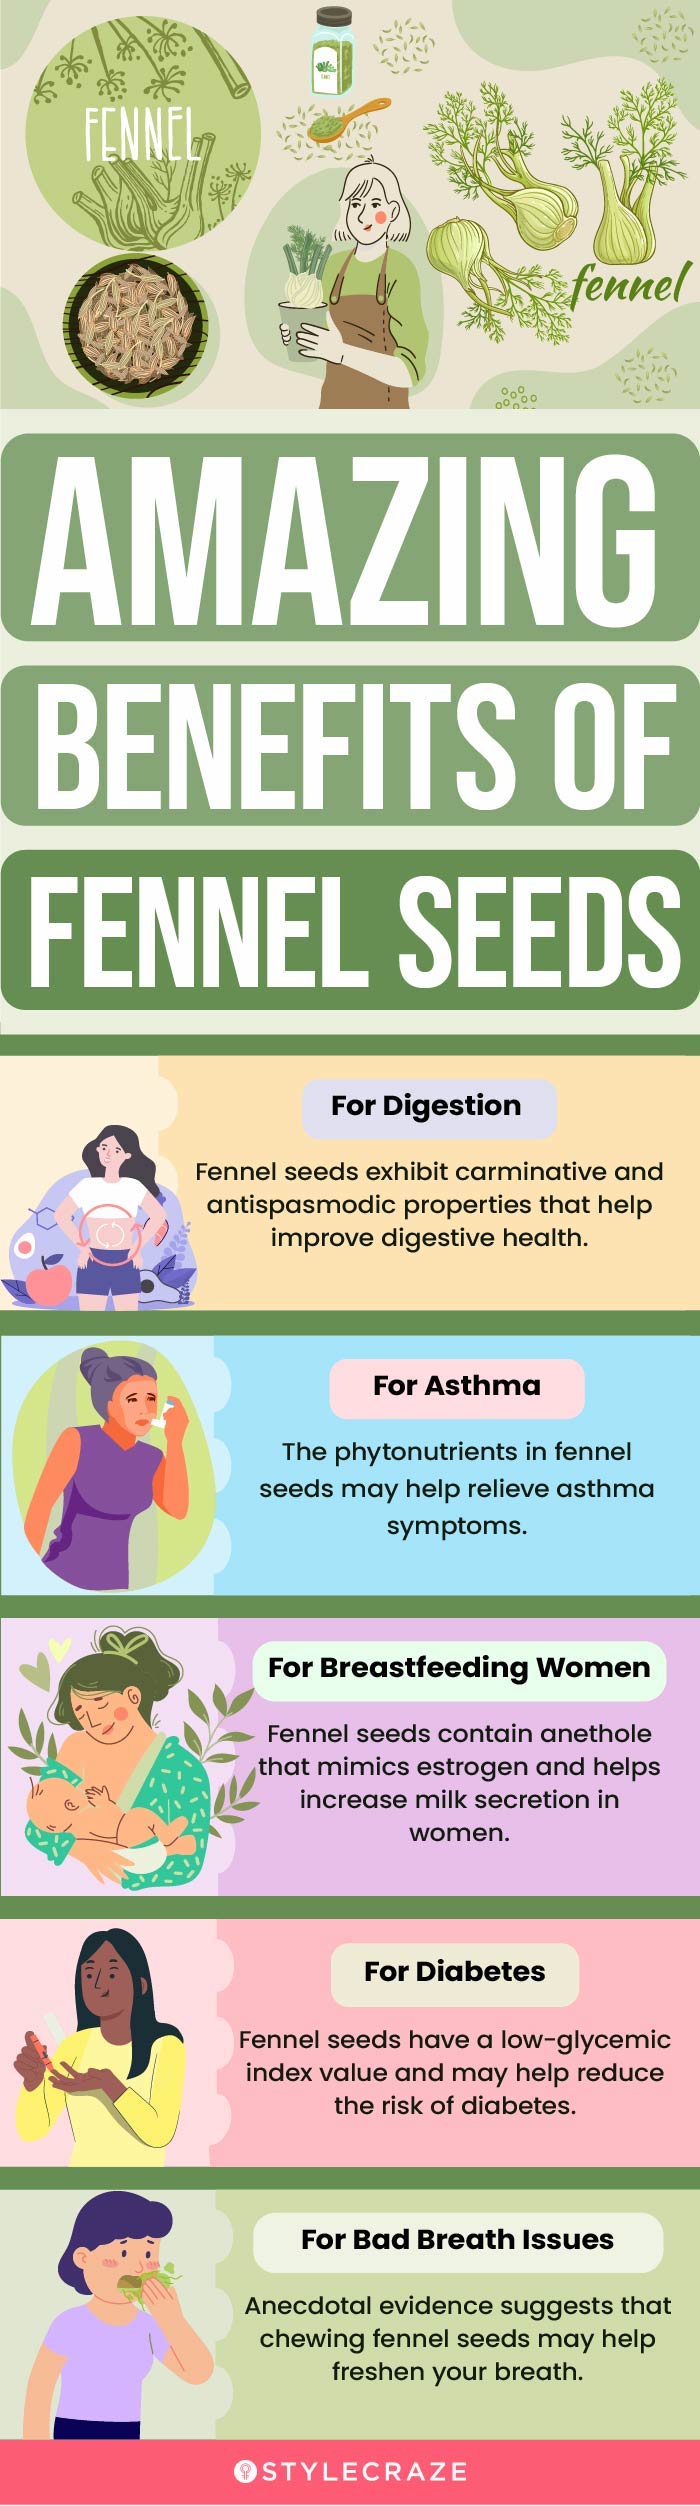 amazing benefits of fennel seeds (infographic)